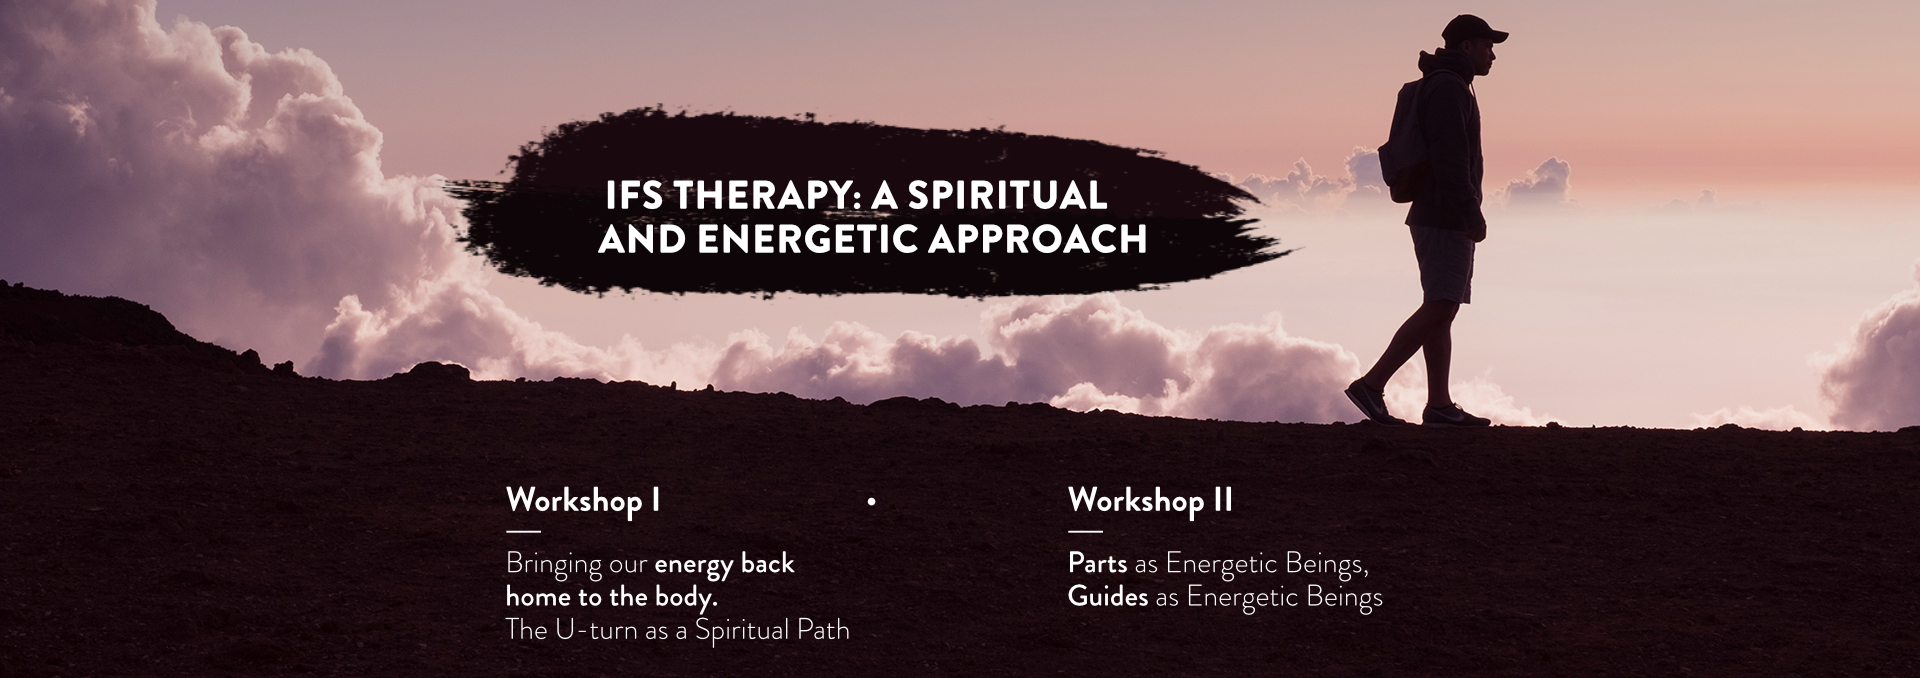 IFS Therapy: A Spiritual and Energetic Approach [LP] 1